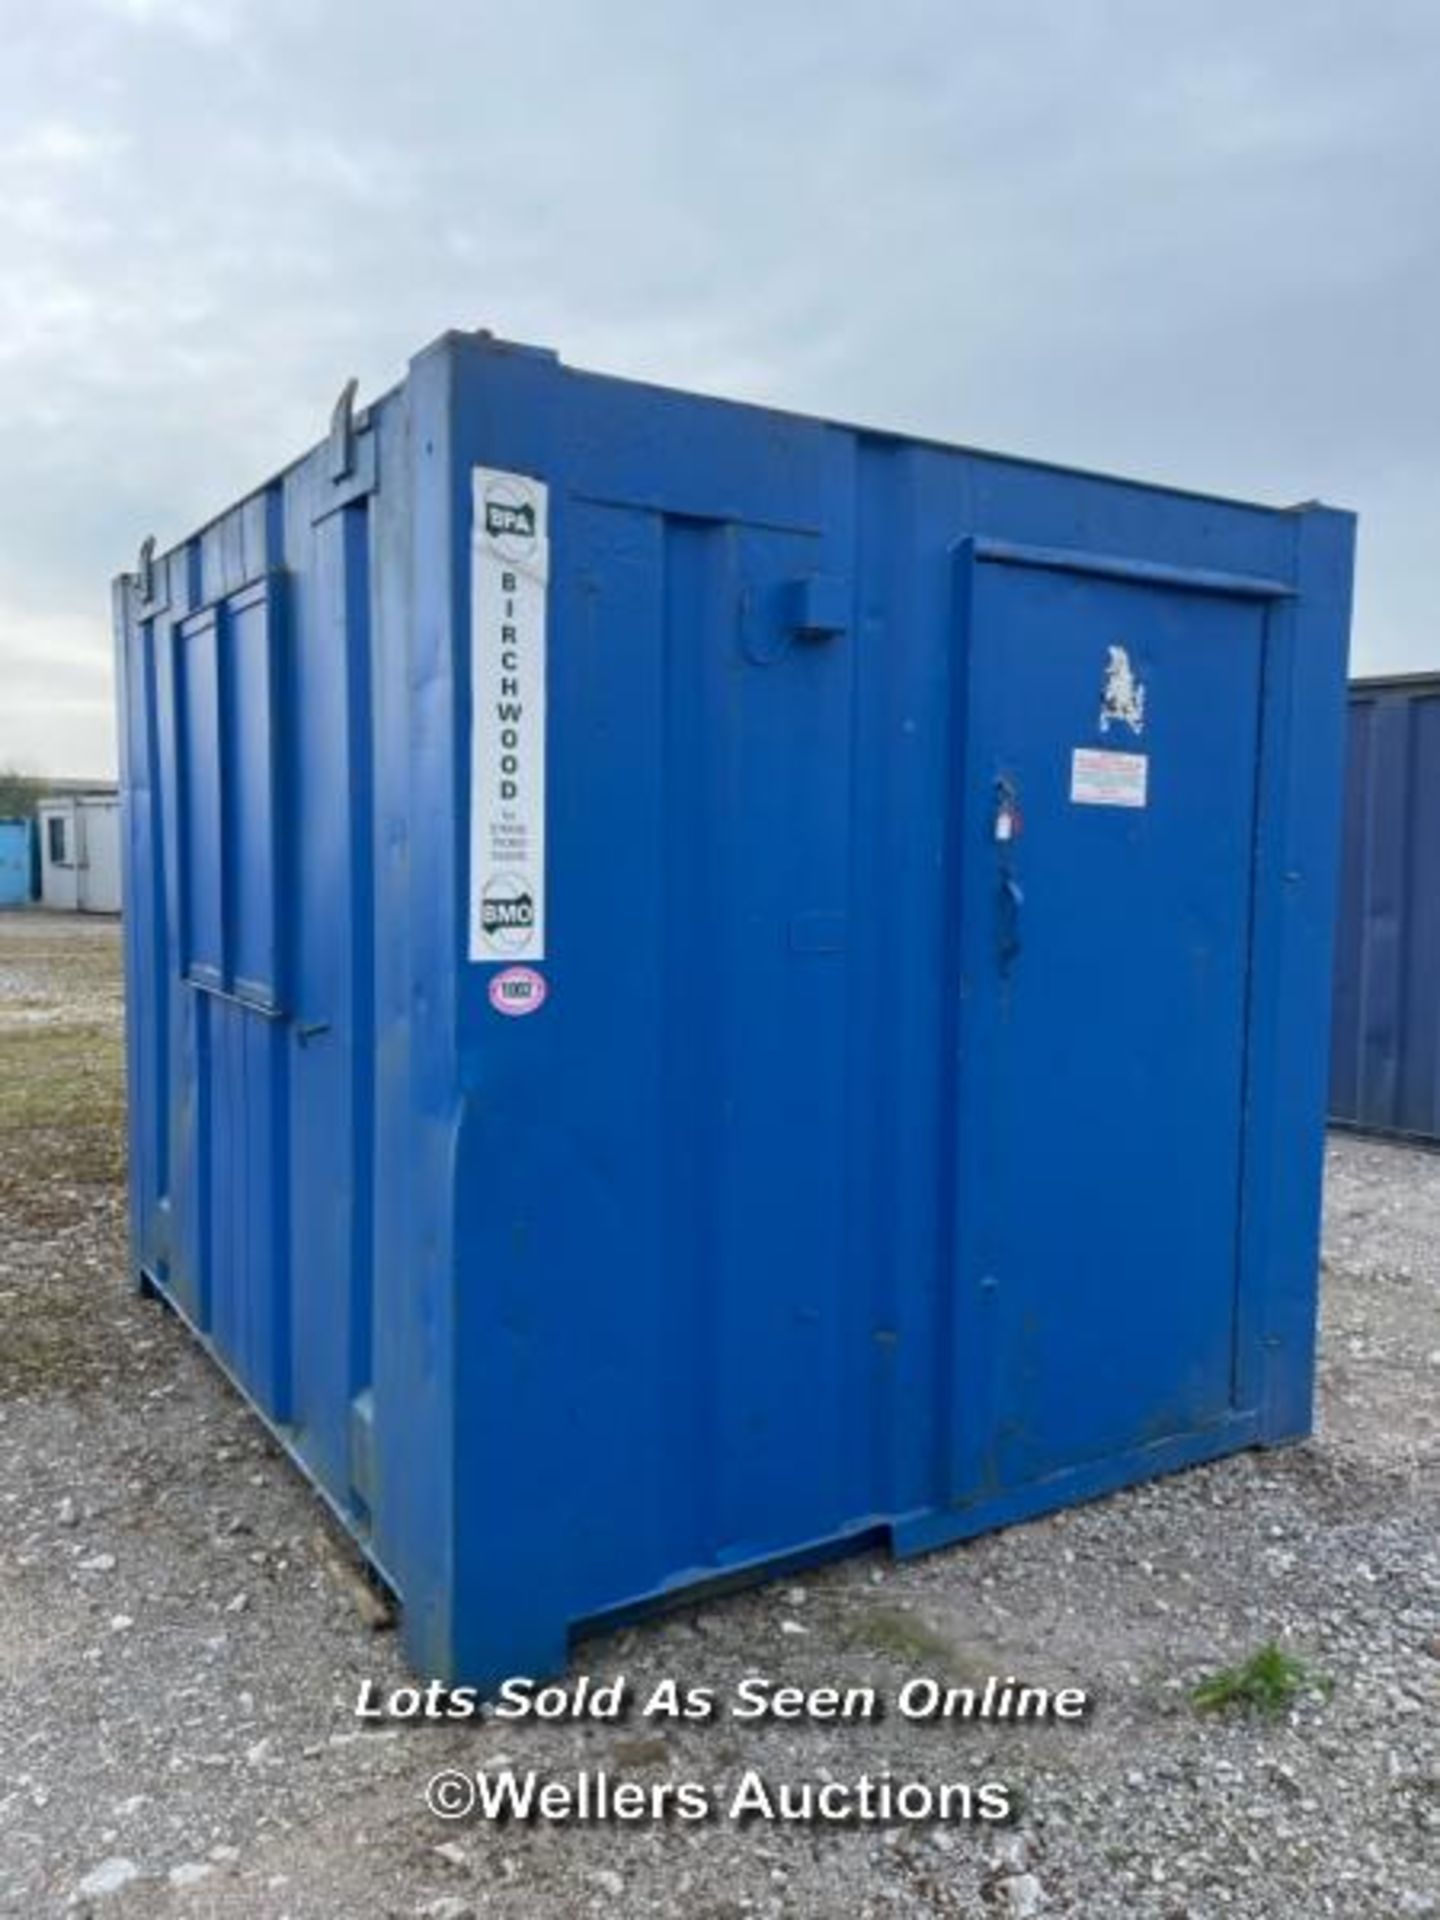 10' X 8' PORTABLE STEEL SHOWER BLOCK, UNIT INCLUDES HYCO EXTRACTION FAN, ELECTRICAL SWITCHBOARD,